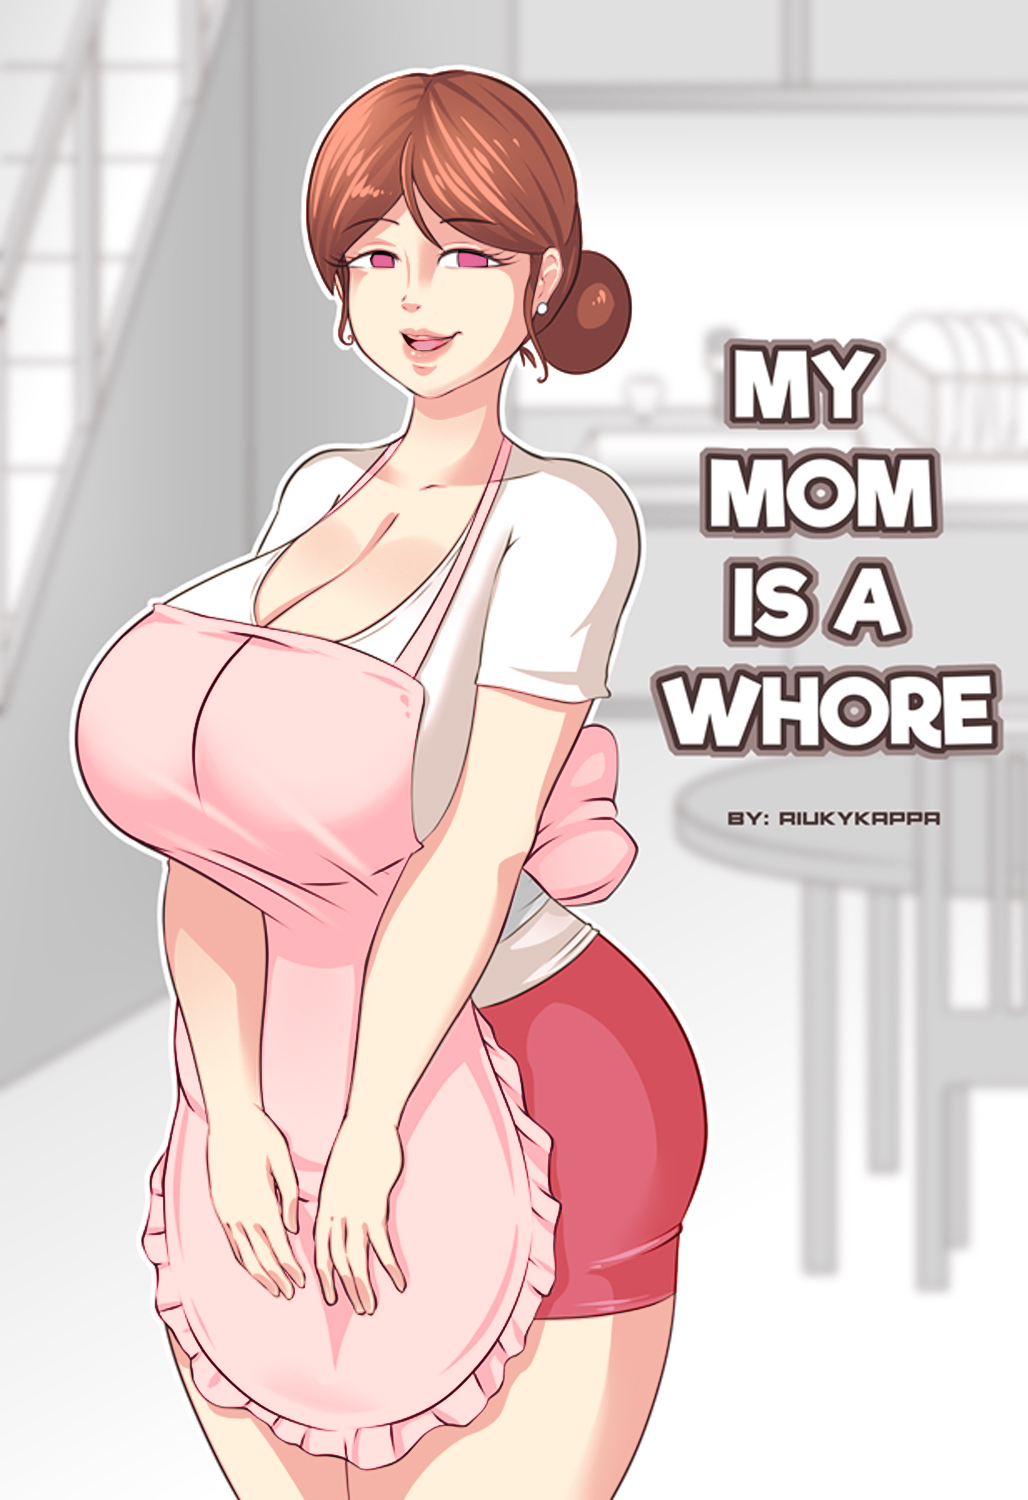 (Riukykappa) My mom is a whore [Part 1]